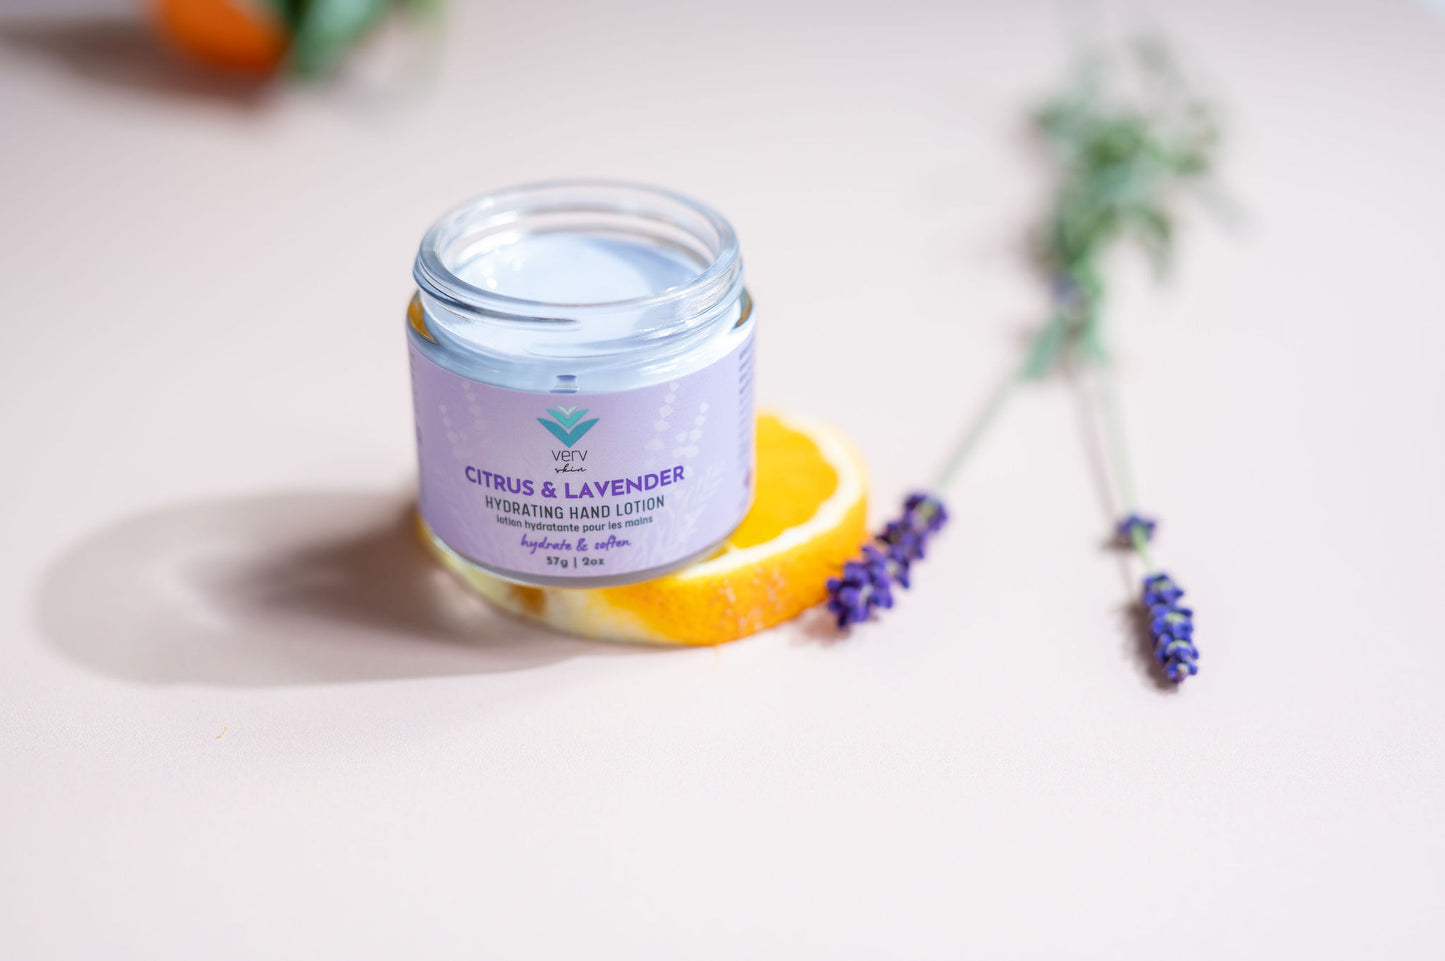 Citrus & Lavender Hydrating Hand Lotion